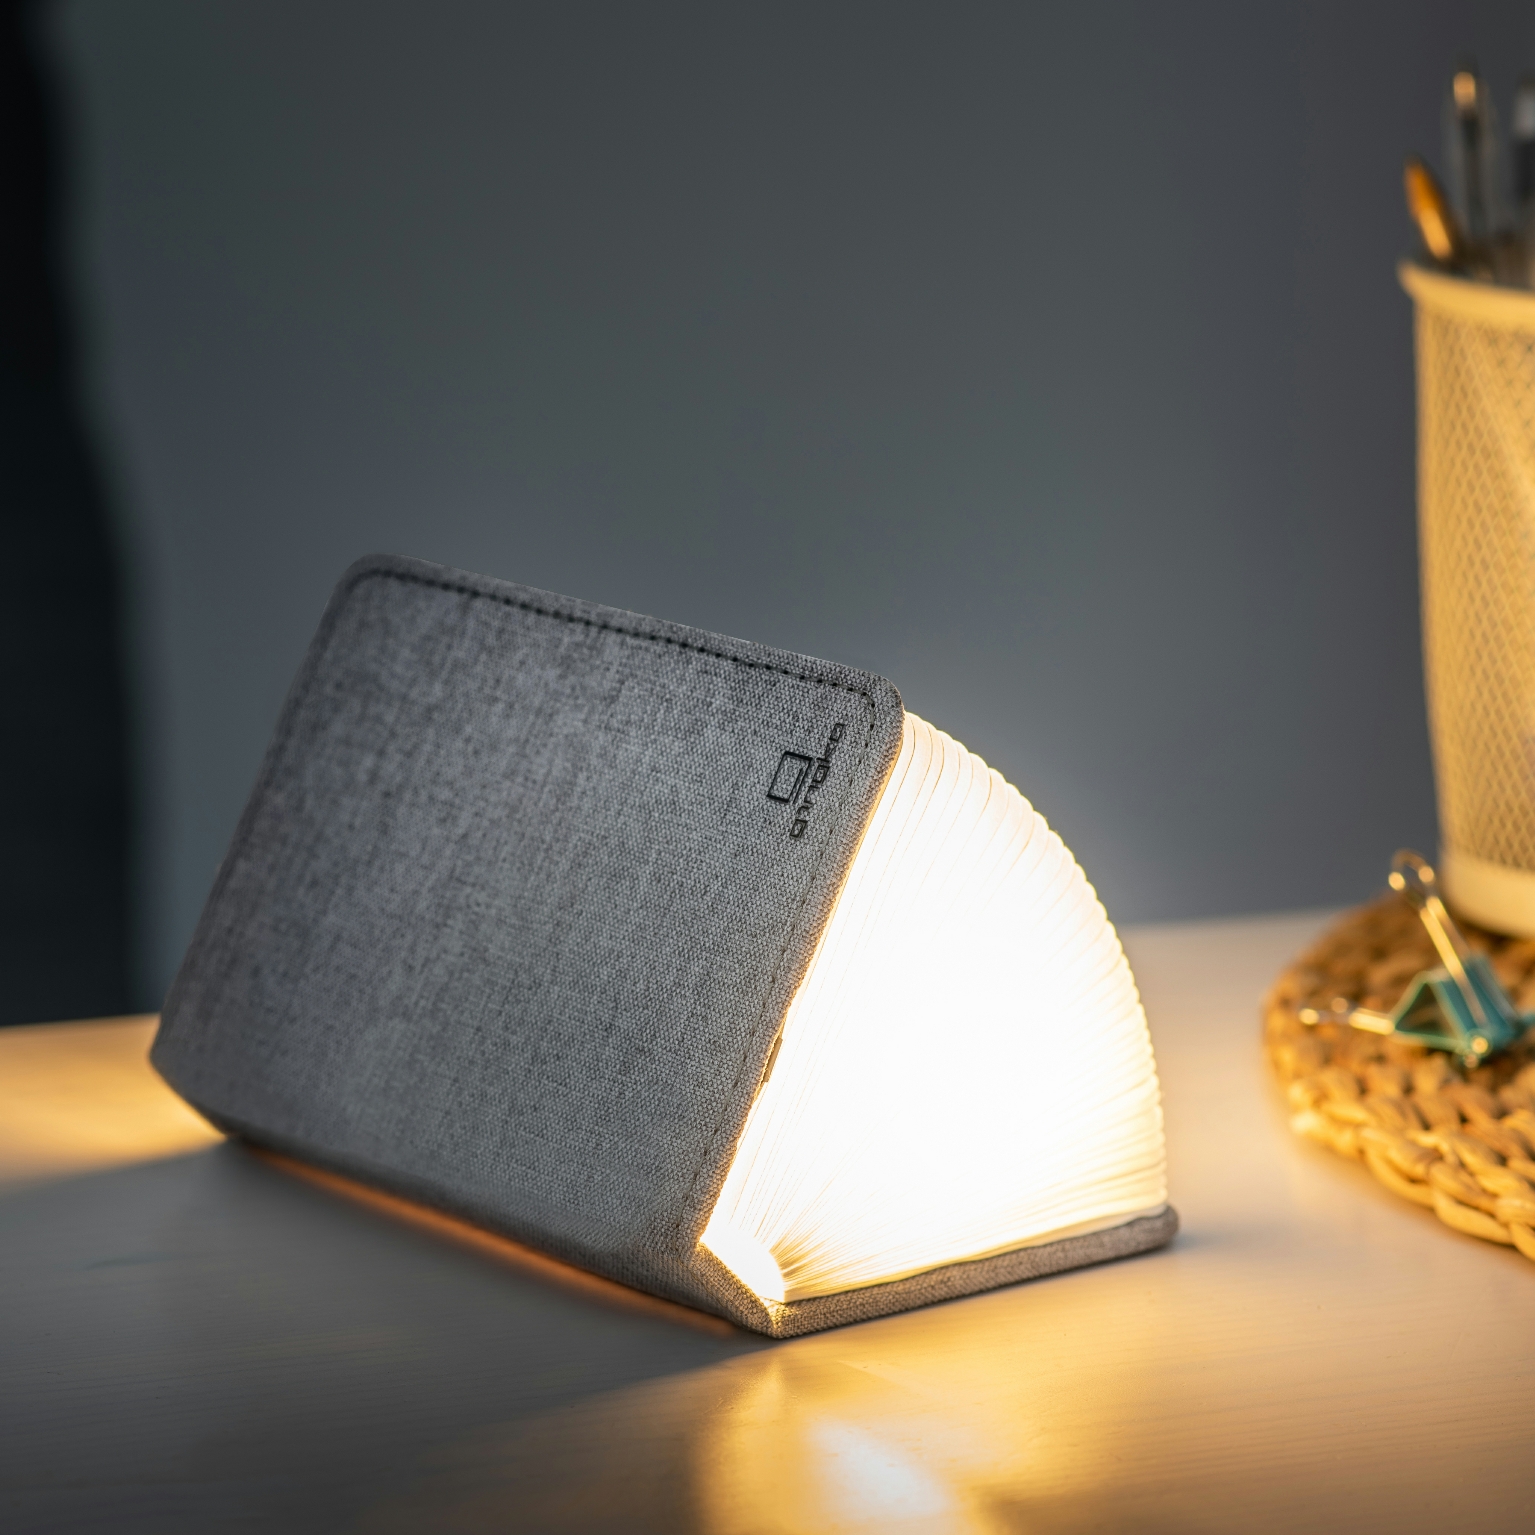 Gingko smart mini book light in coffee part opened on table